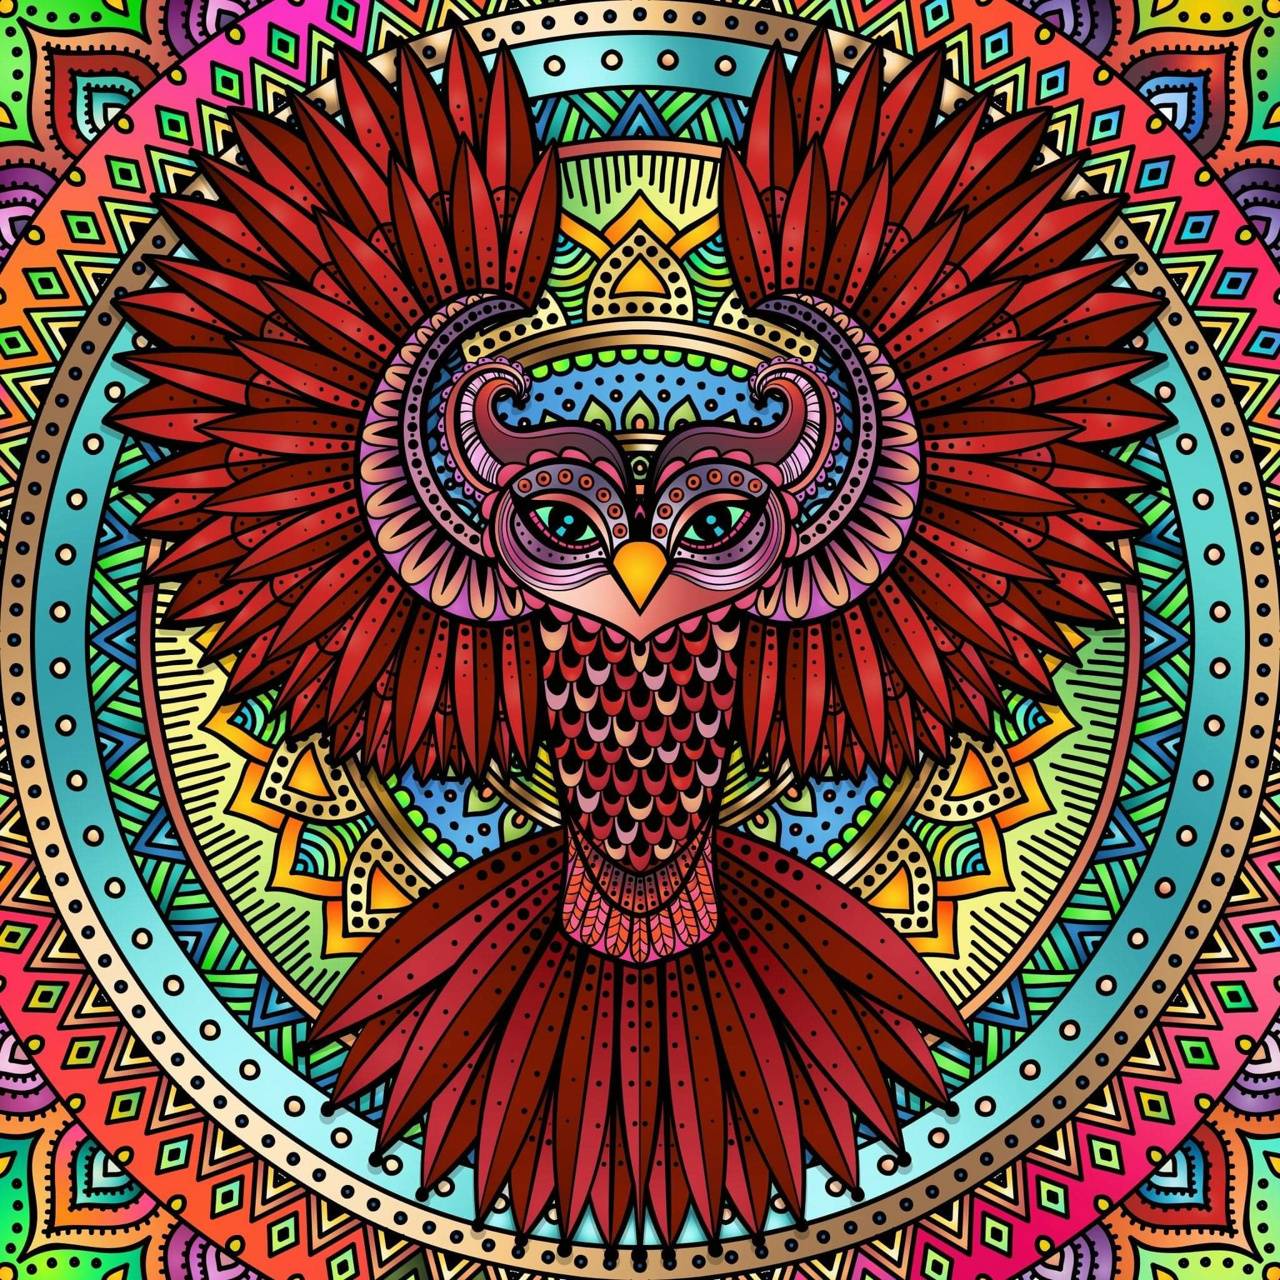 Colorful Owl Wallpaper, HD Colorful Owl Background on WallpaperBat